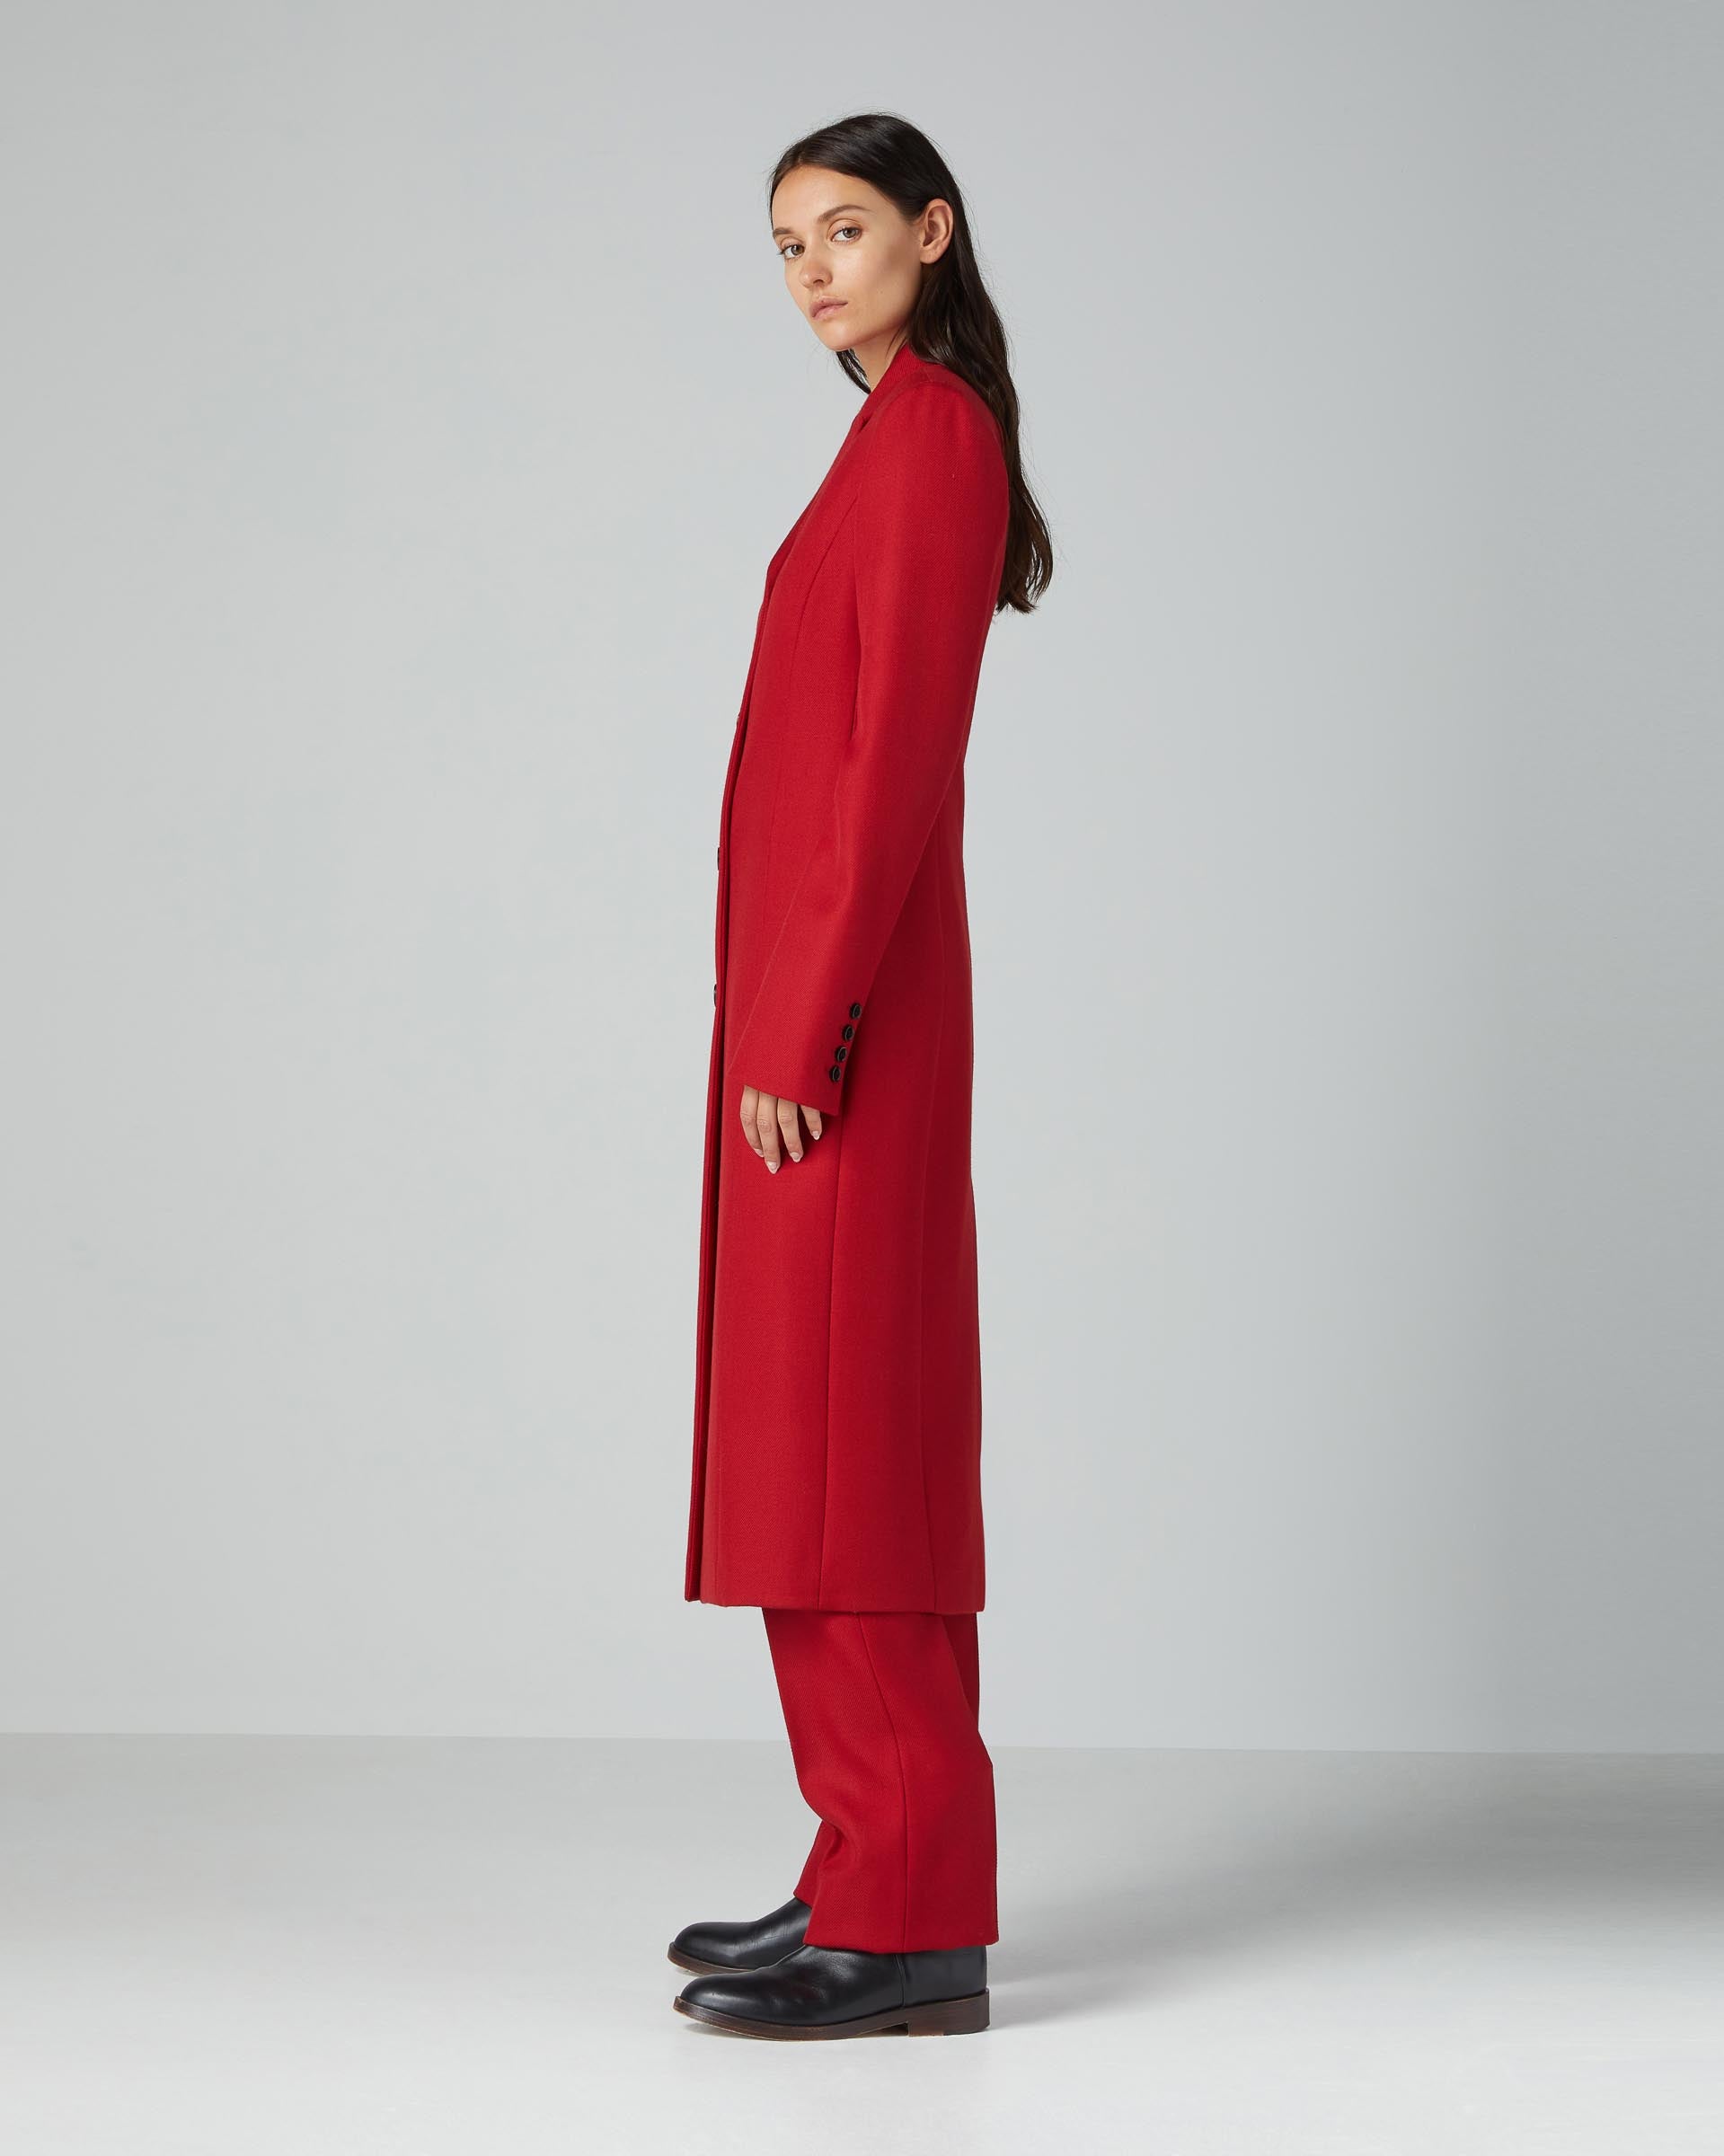 Lucia Coat in Wool Twill, Deep Red